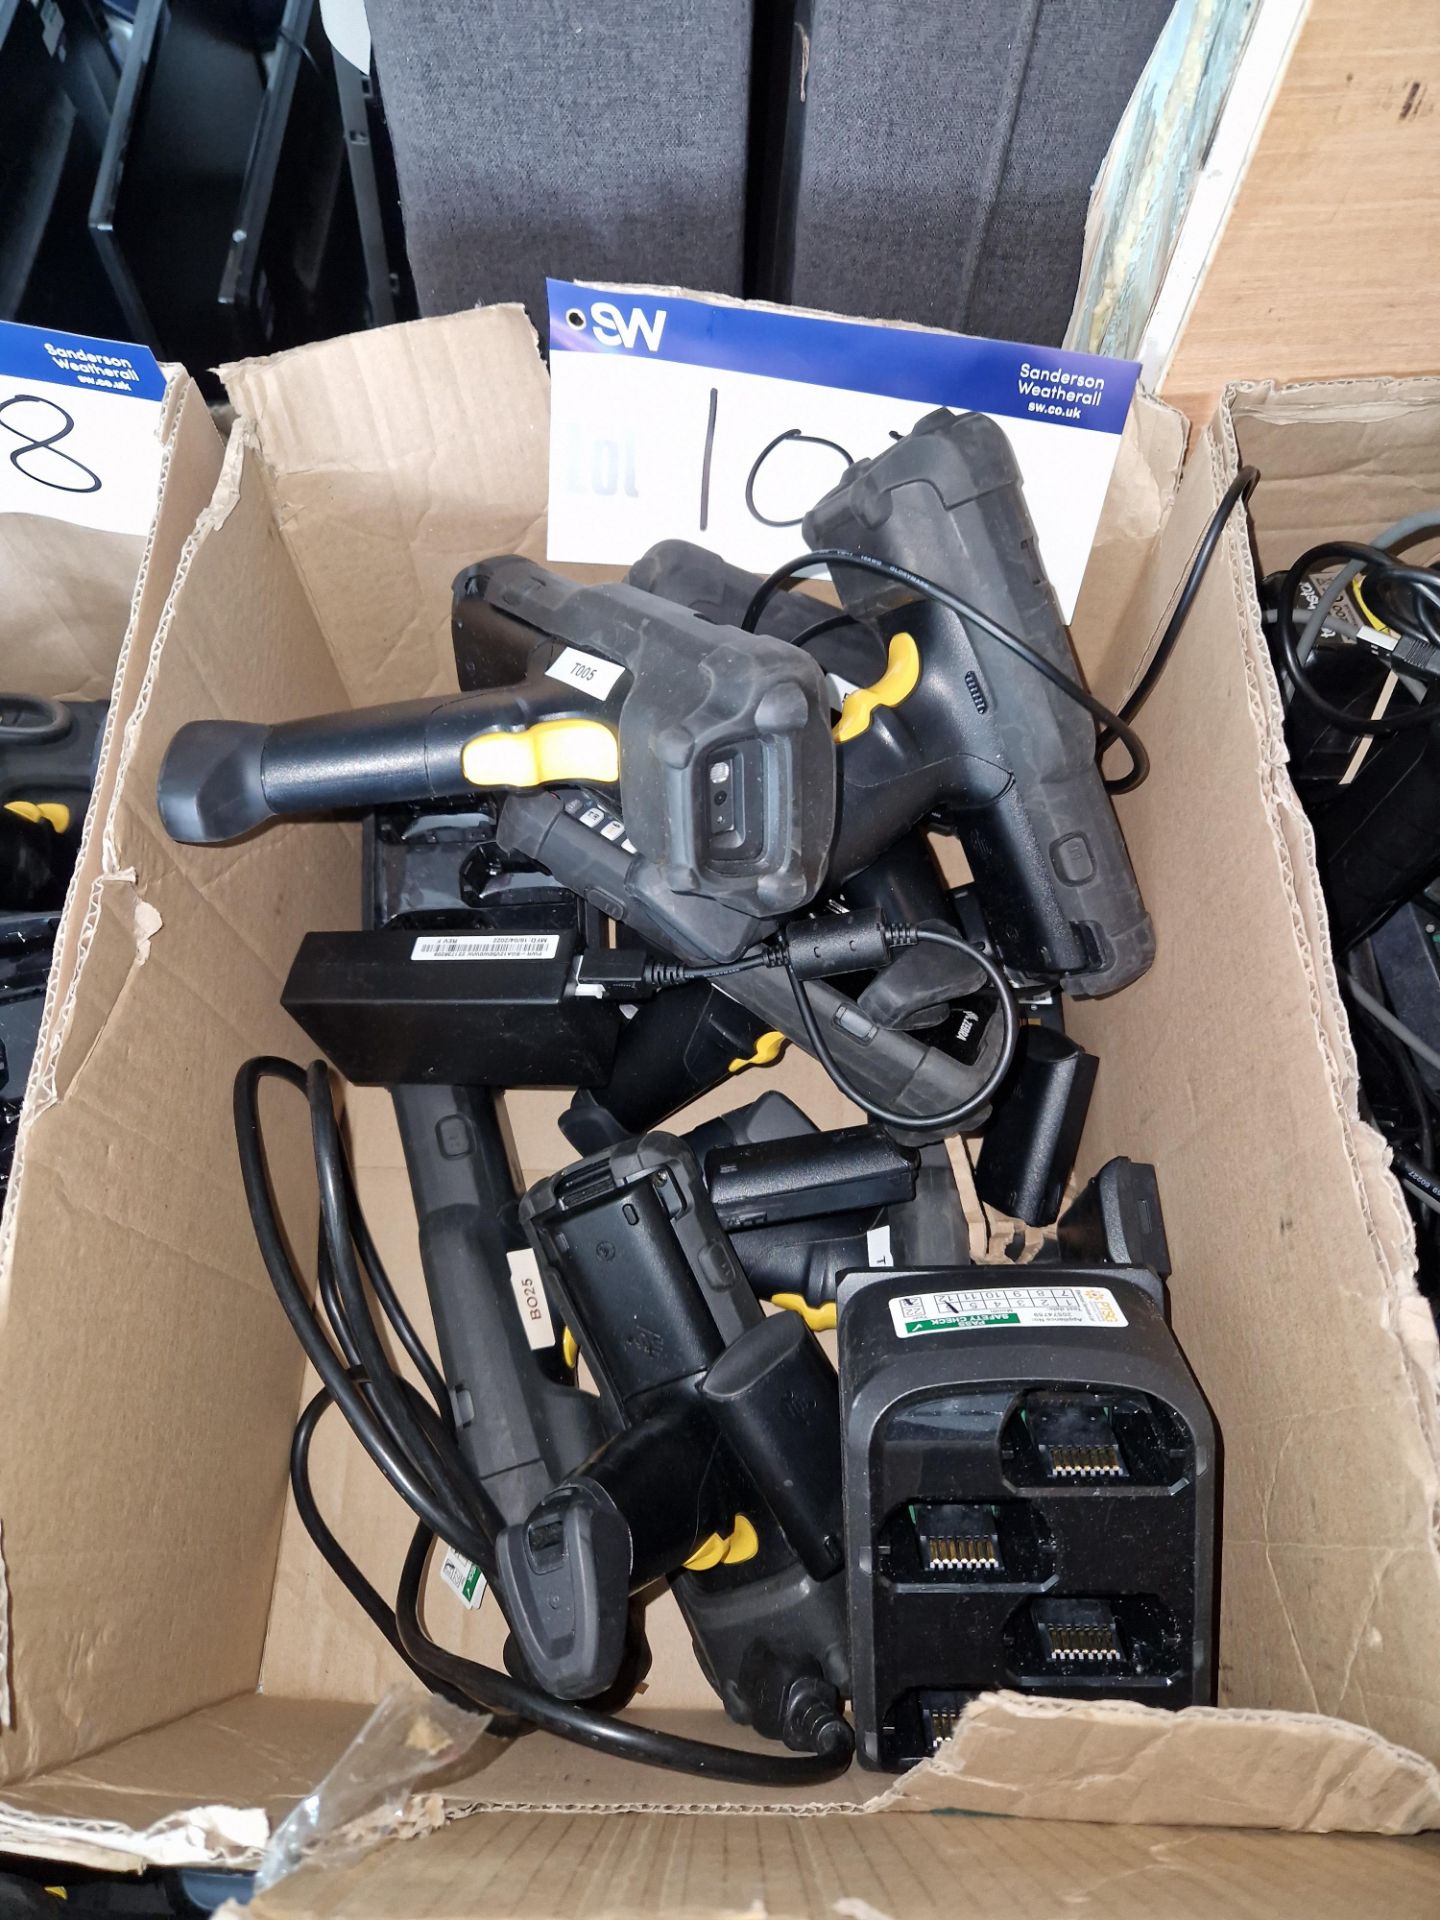 Seven Zebra MC330X Scanners with Chargers and Spare Batteries Please read the following important